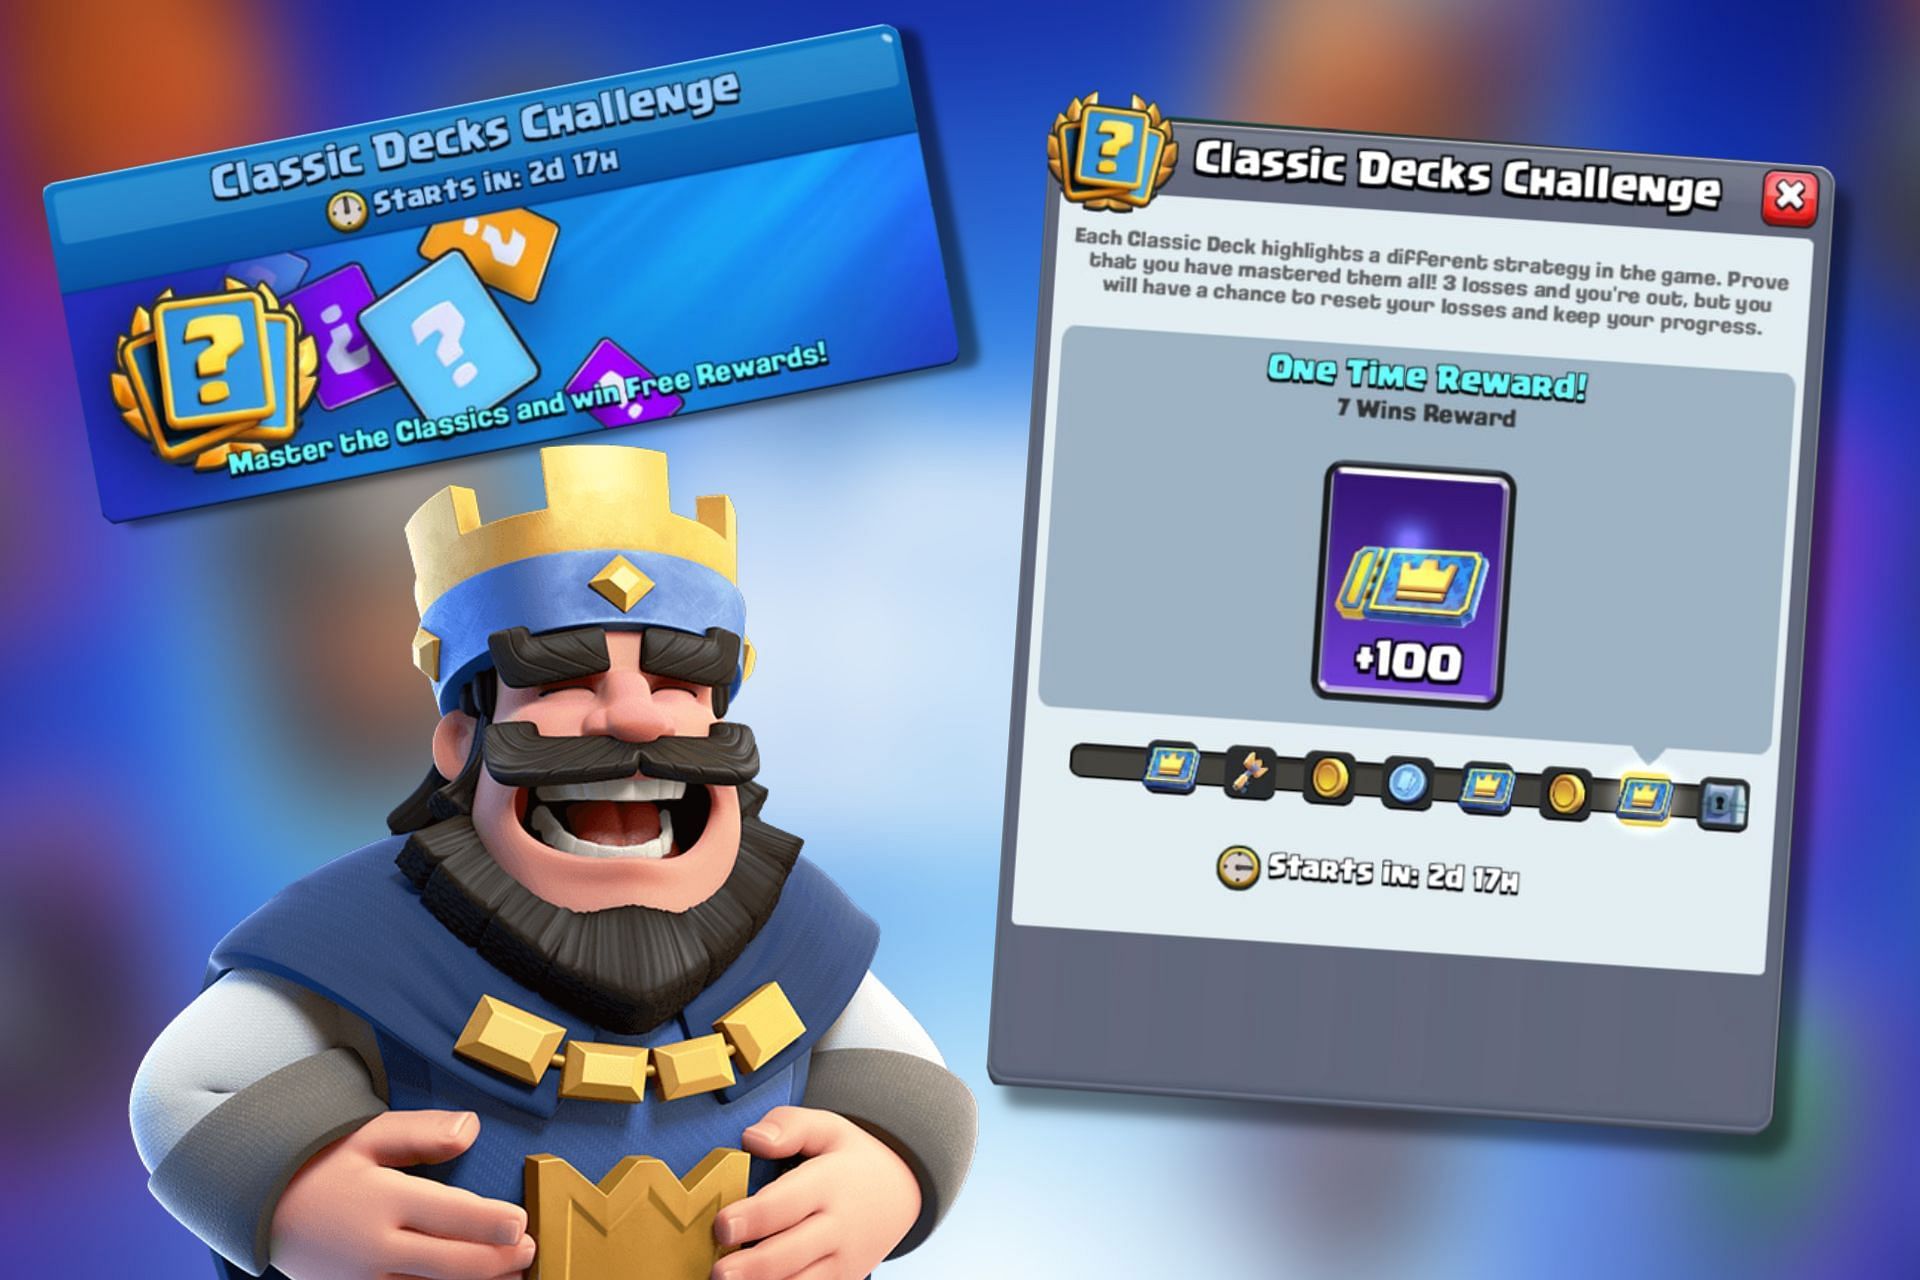 Ramp Up Challenge in Clash Royale: Information, rewards, and more